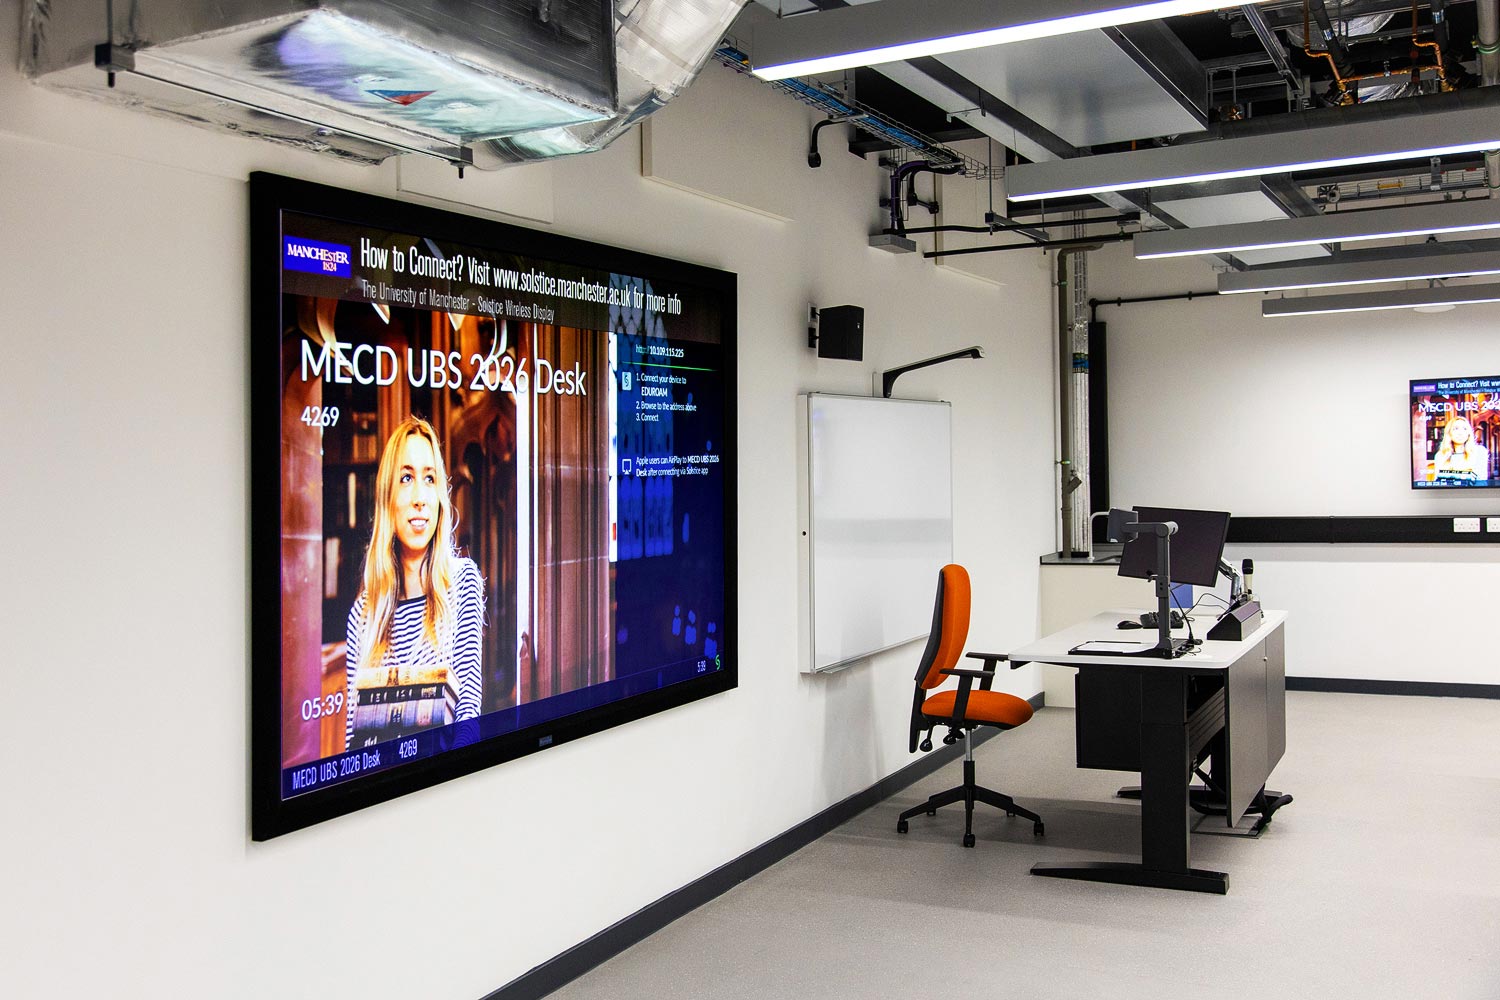 Thumbnail - The small Meet & Teach rooms provide at least one display and an AV system based on an Extron SW HD 4K PLUS 4K/60 HDMI switcher. Intuitive AV system control is provided by an Extron TouchLink Pro touchpanel or Network Button Panel.